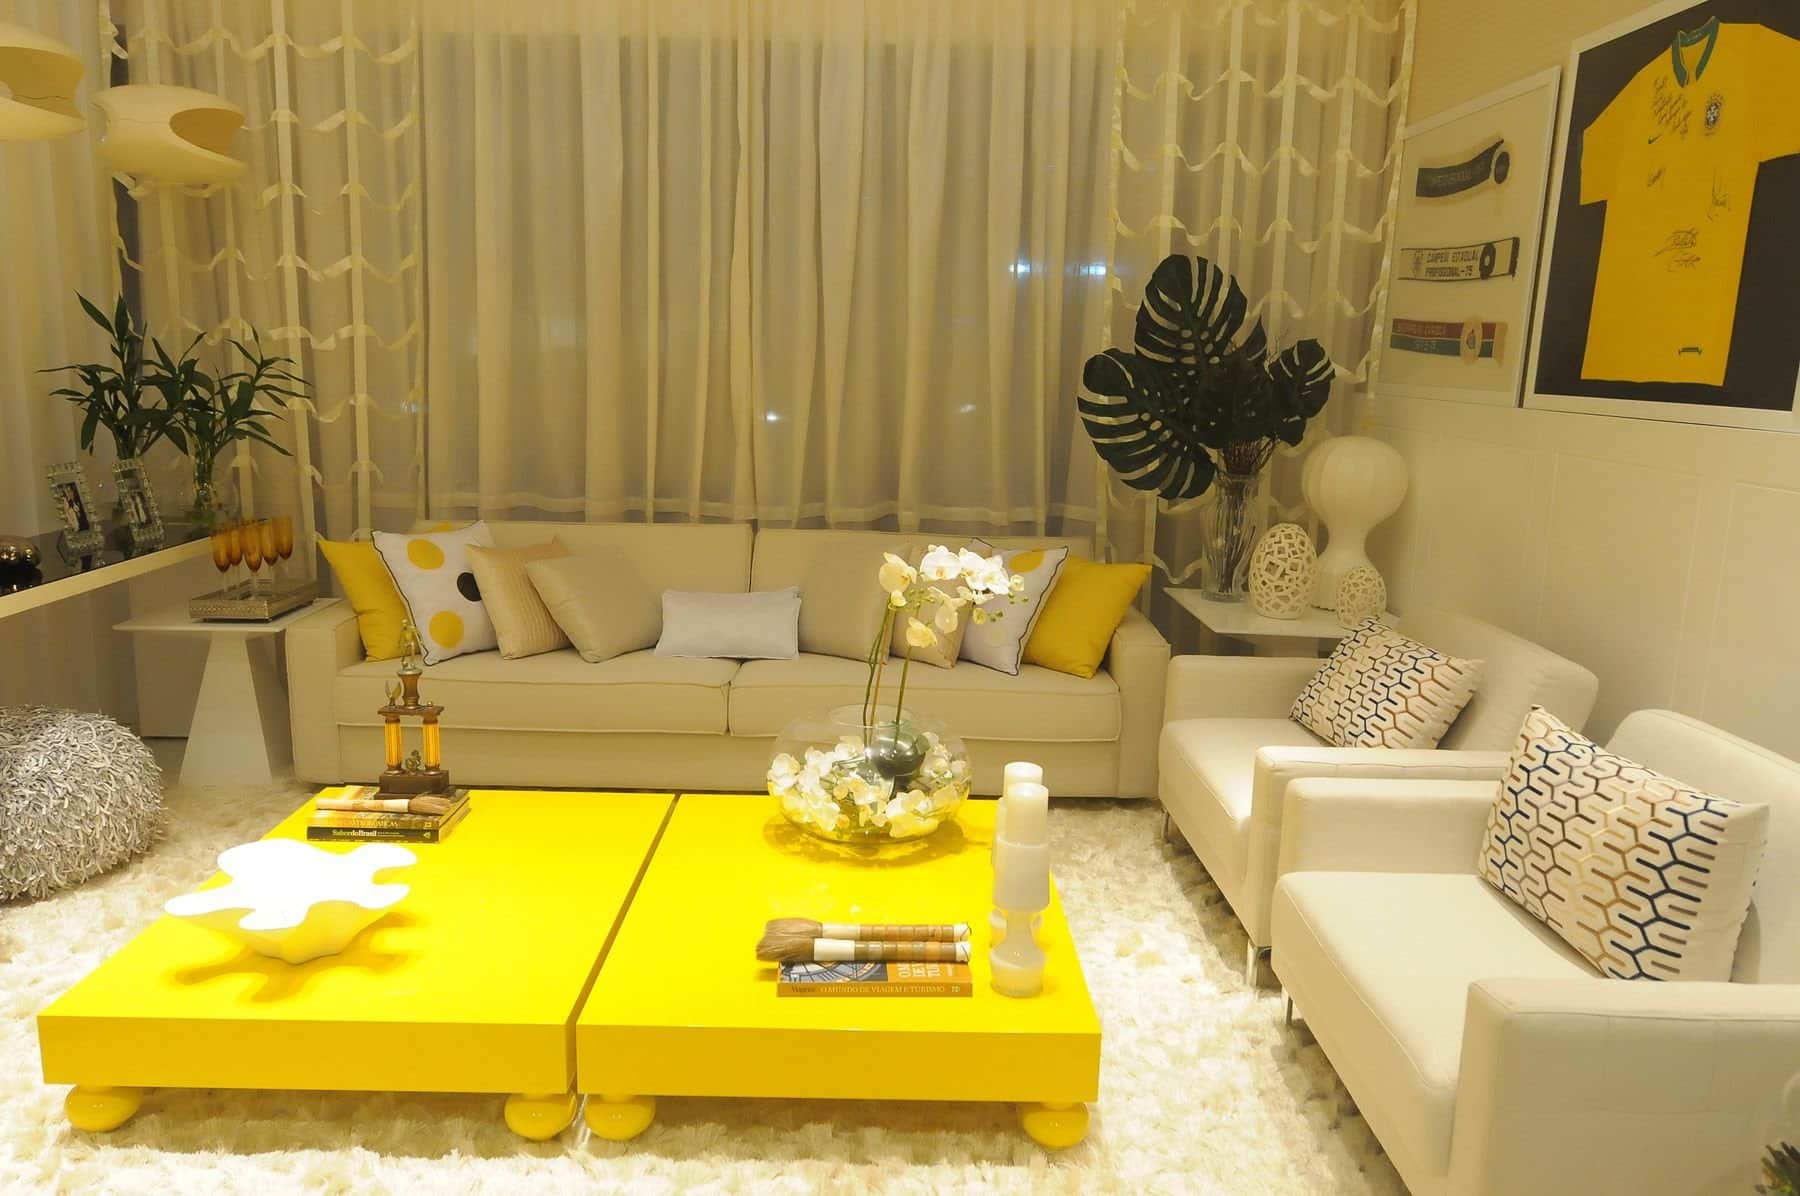 Unusual low yellow coffee tables for a large living zone with beige sofa and armchairs